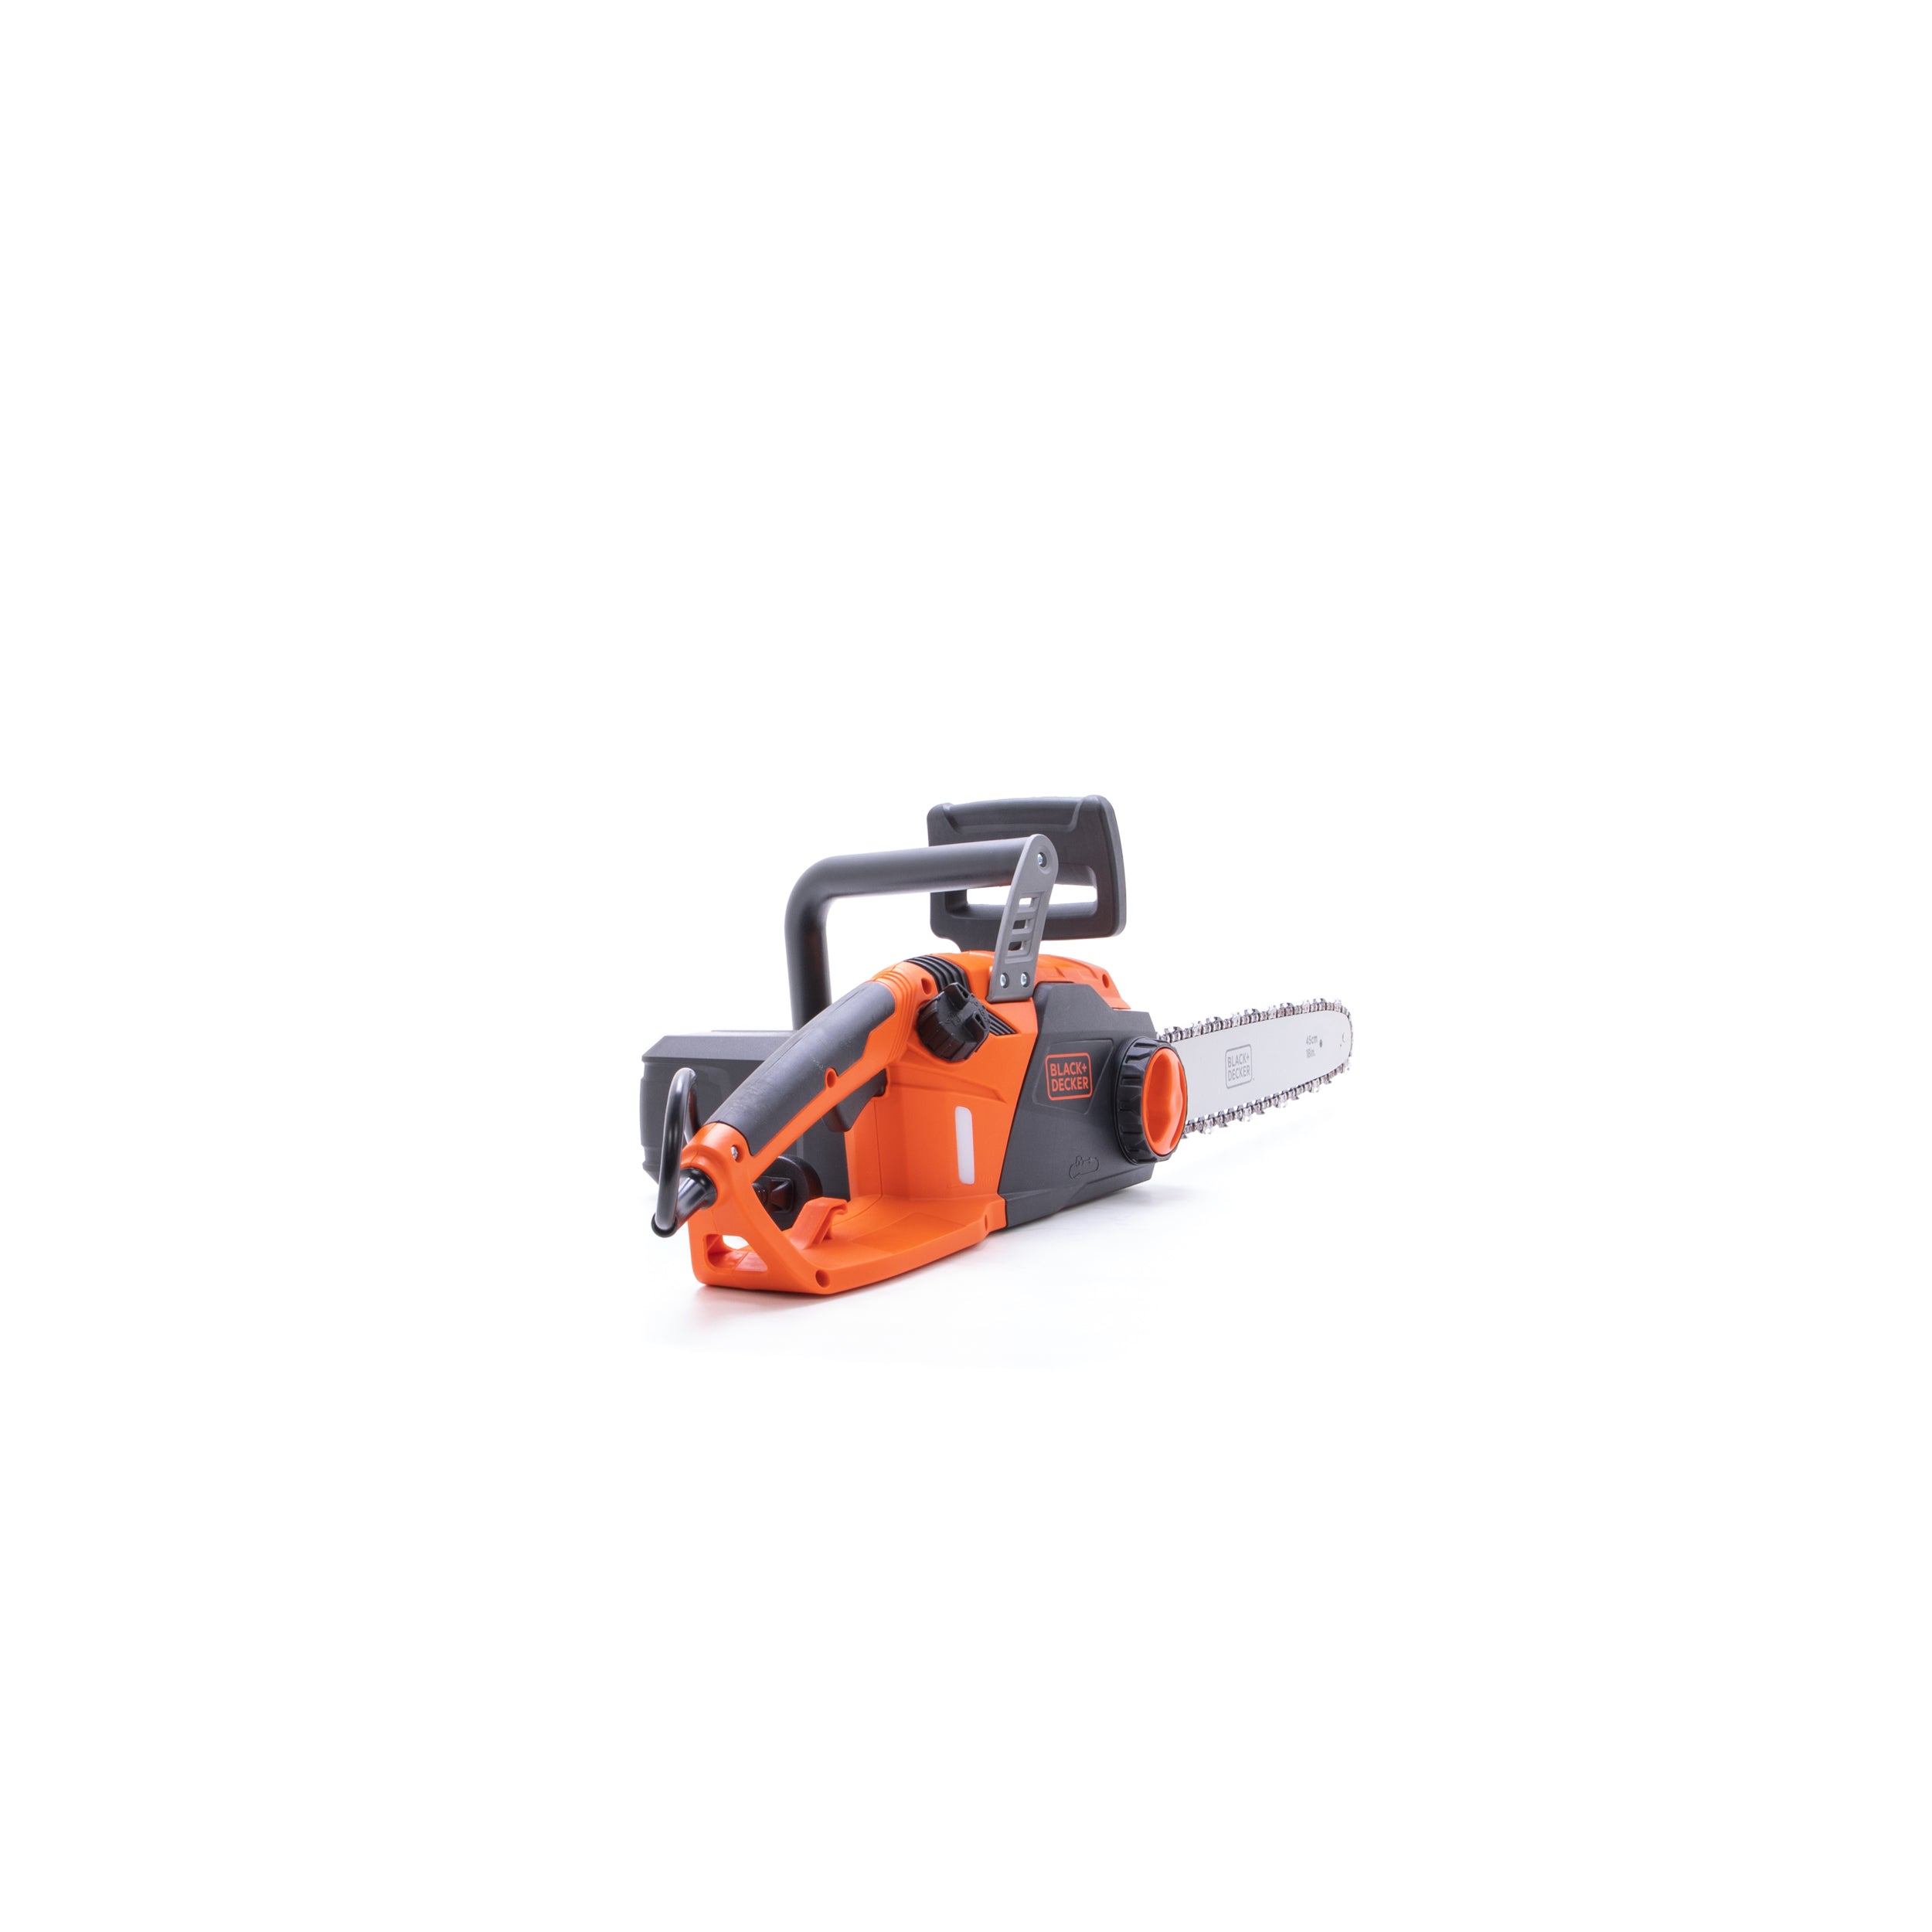 Black & Decker 15A Corded Chainsaw / 18 in. bar at Tractor Supply Co.